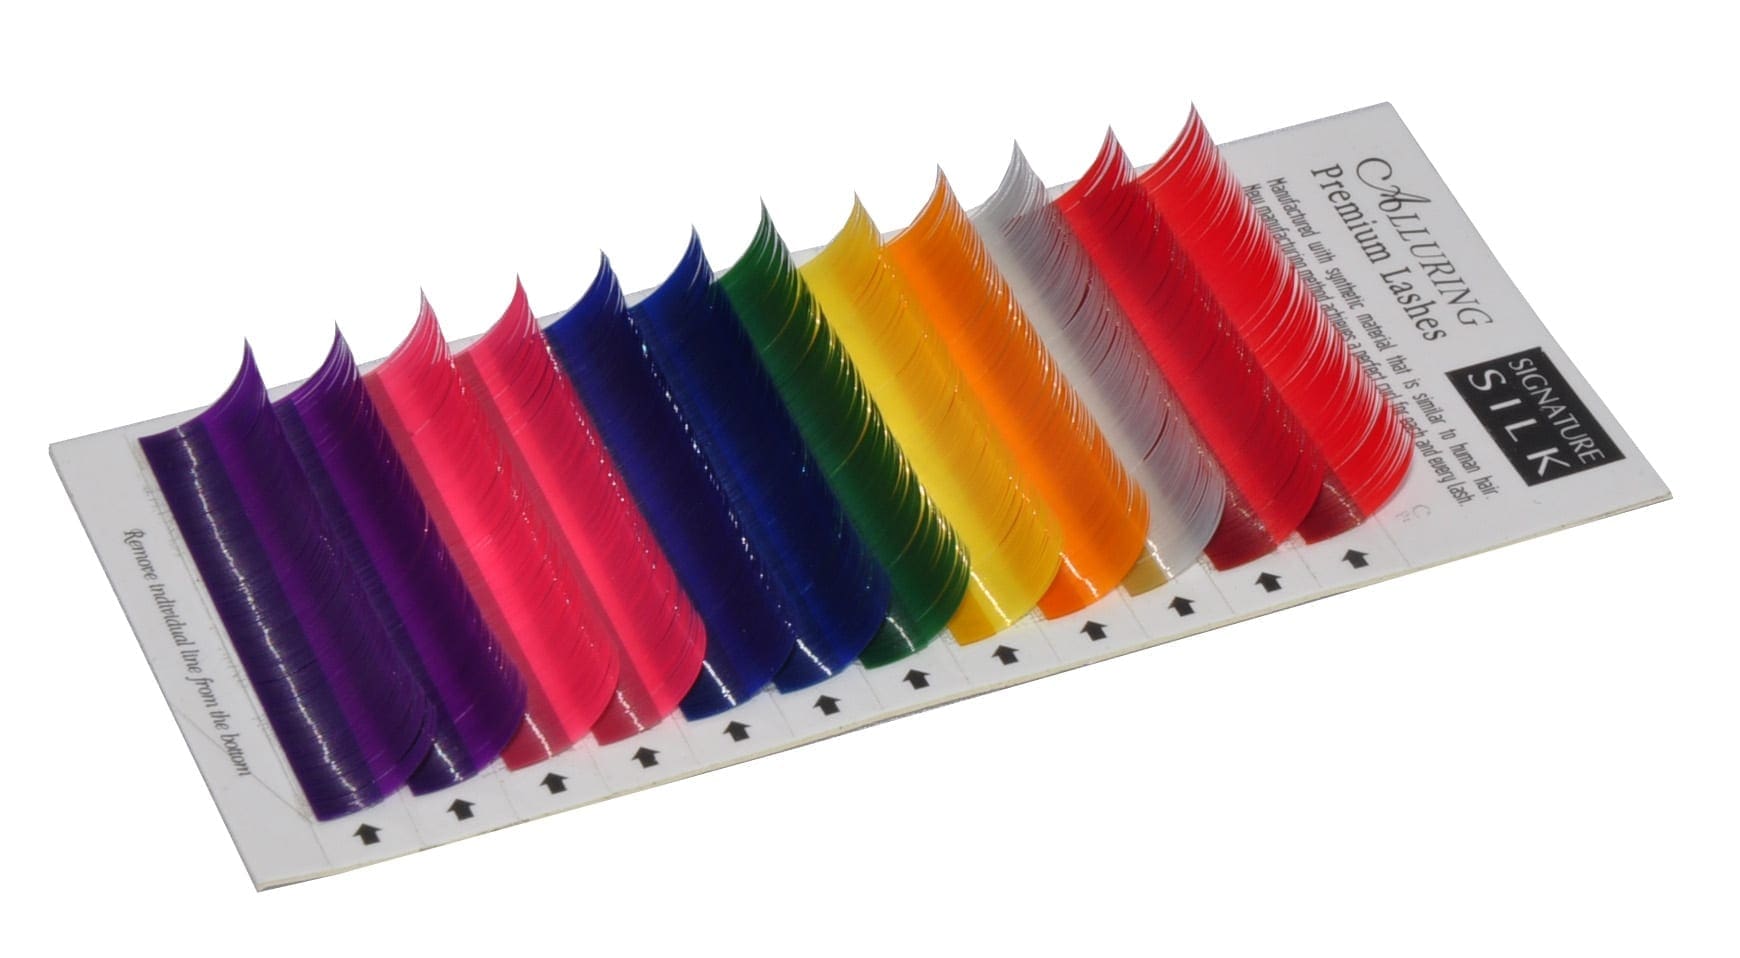 A row of different colored papers on top of a rack.